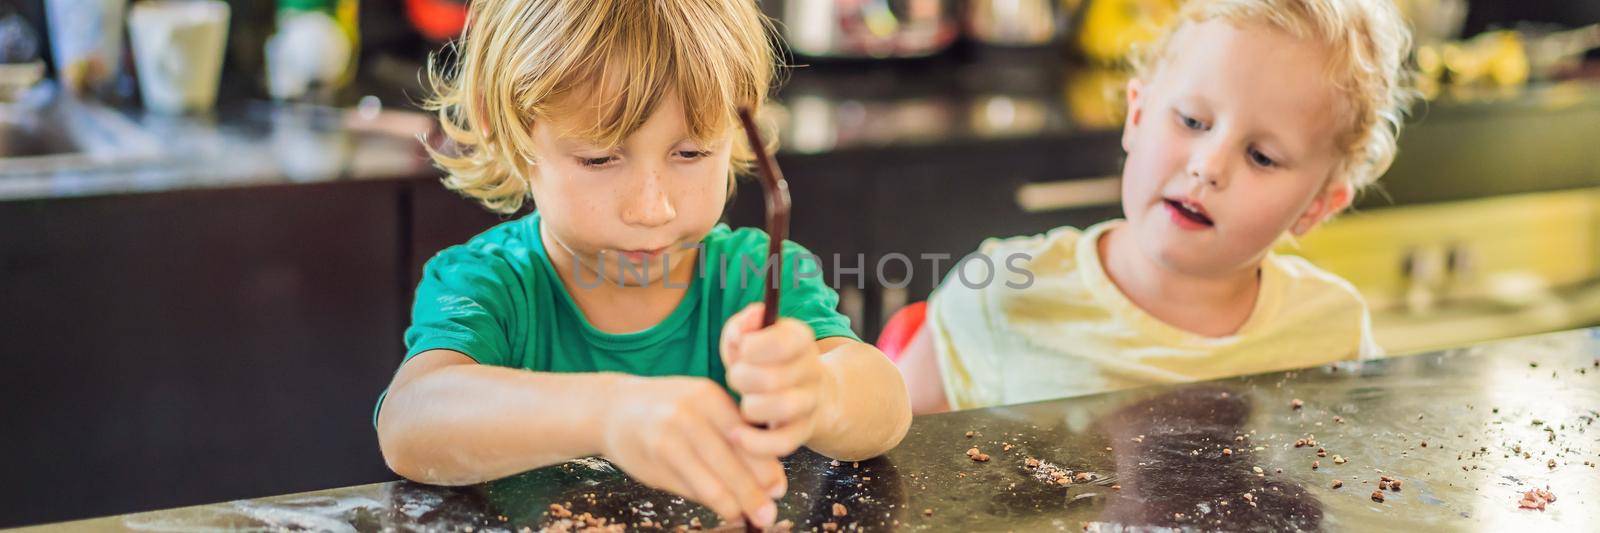 Two children a boy and a girl make cookies from dough BANNER, LONG FORMAT by galitskaya